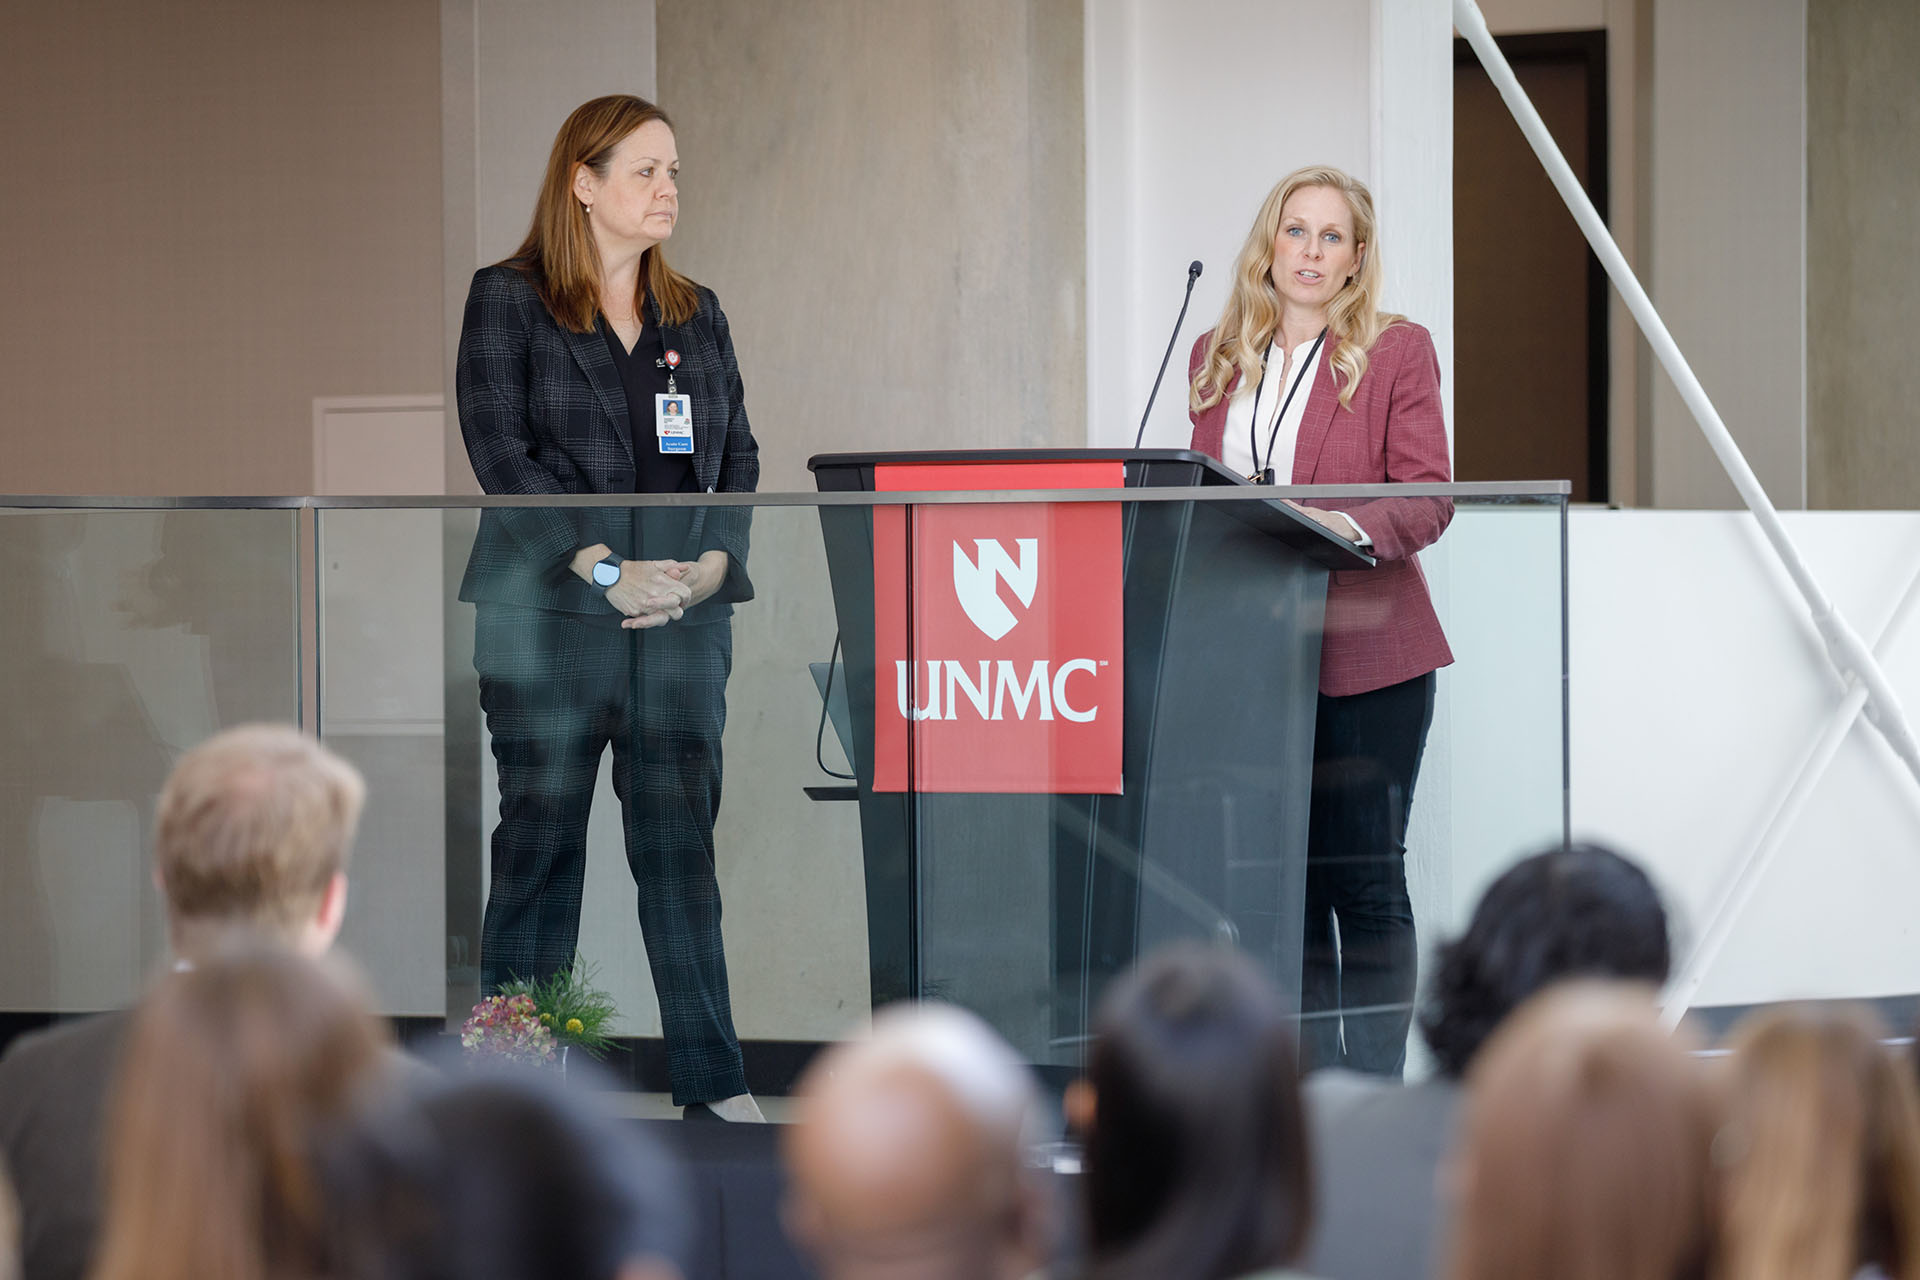 As keynote speakers&comma; Ashley Farrens&comma; trauma program manager at Nebraska Medicine&comma; and &lpar;at left&rpar; Charity Evans&comma; MD&comma; chief of the division of acute care surgery&comma; shared their work with the hospital-based violence prevention programs Dusk to Dawn and ENCOMPASS Omaha&period;